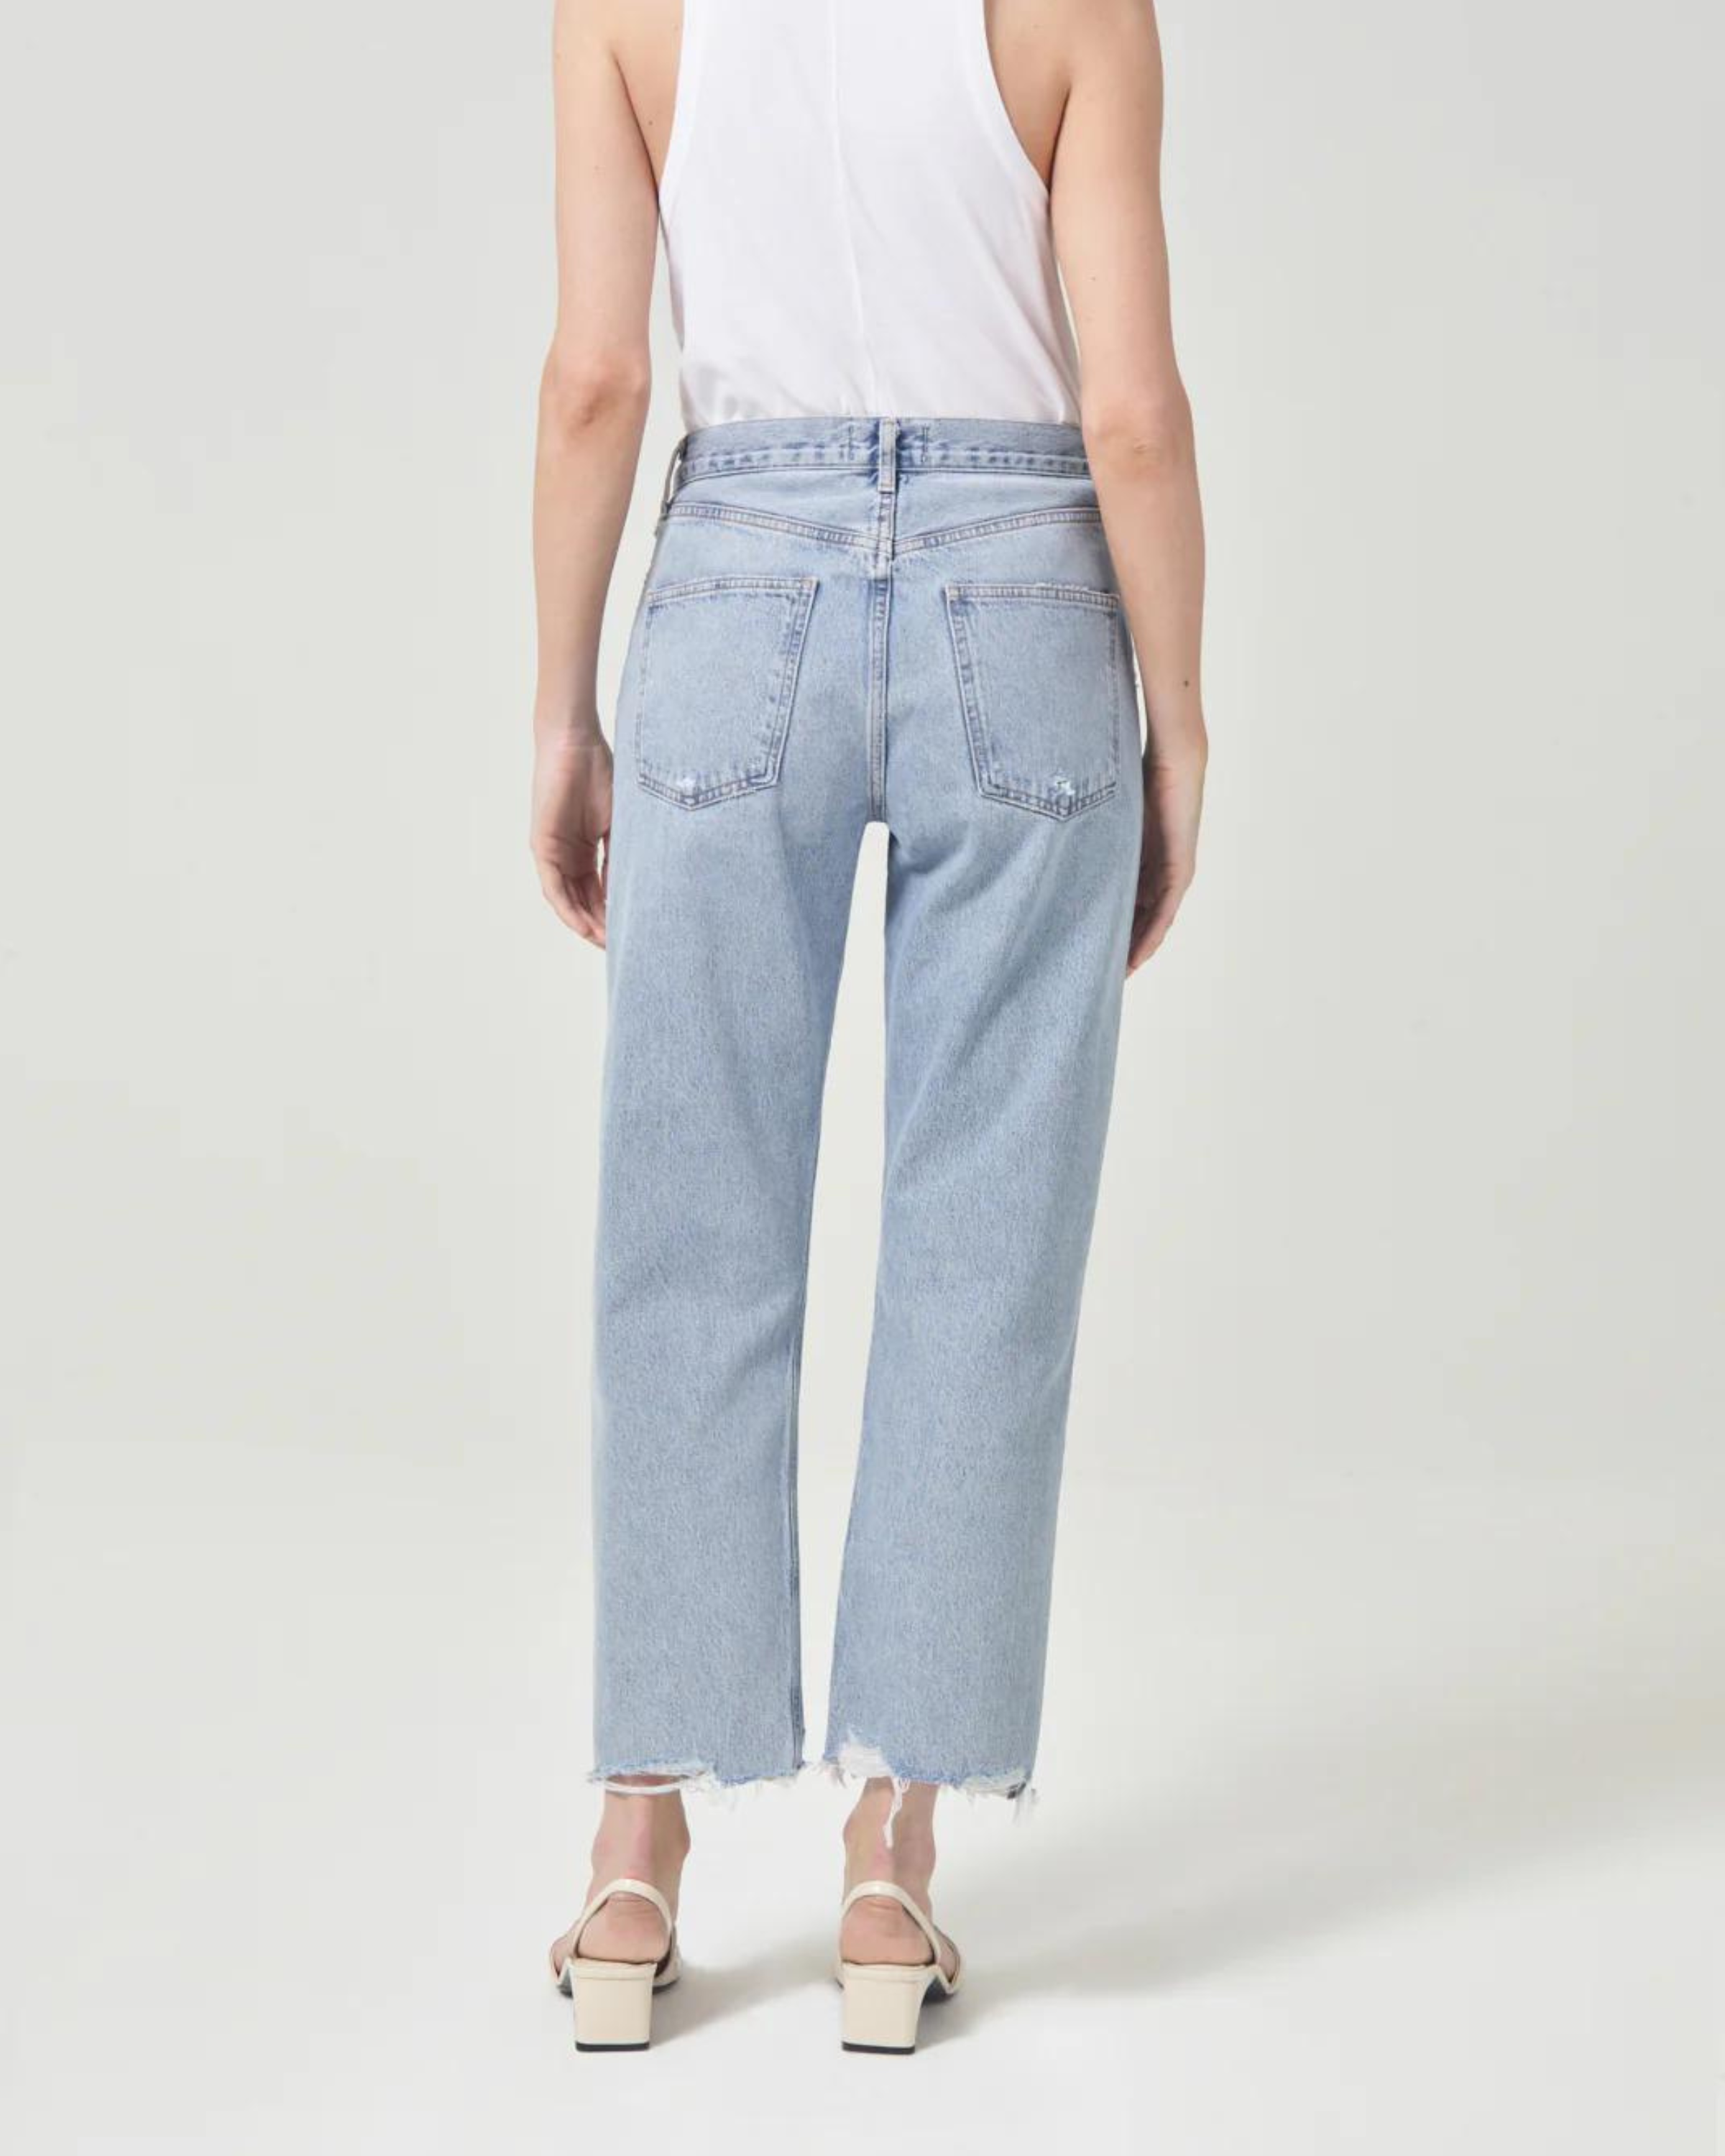 Agolde 90's Crop Pant in Nerve